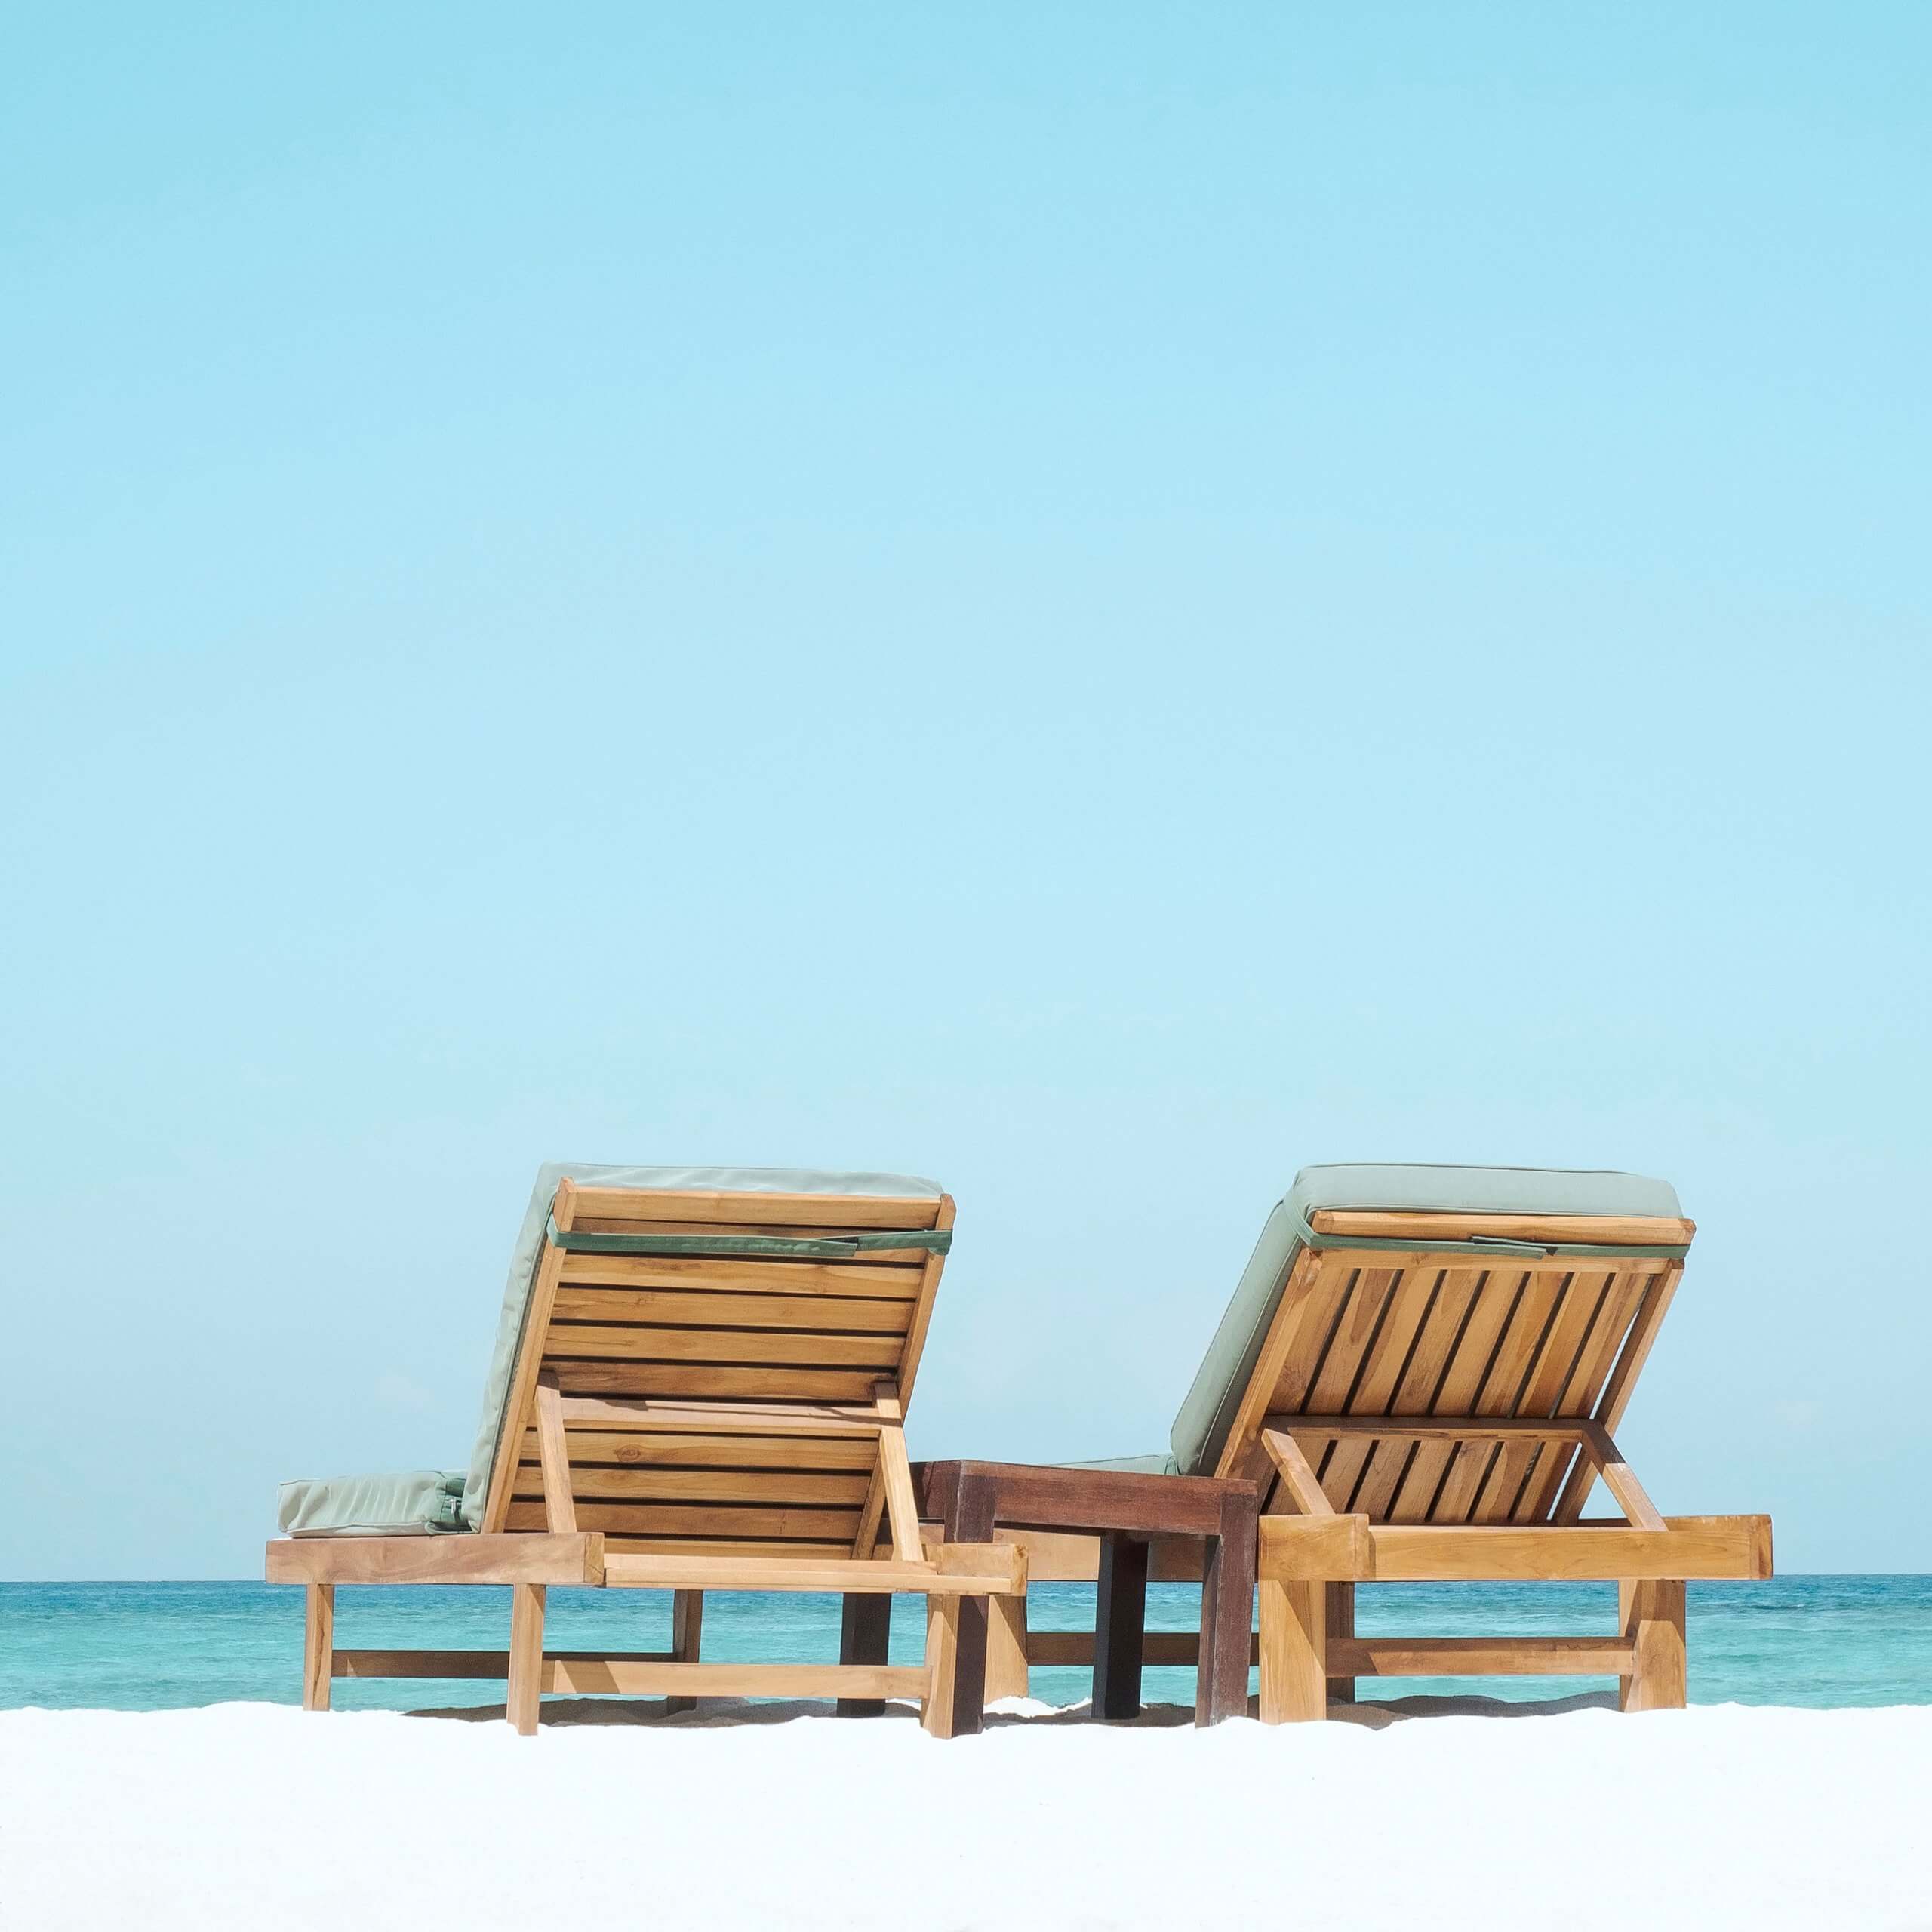 An image of two deck chairs on a beach. A visual metaphor for the topic of this article, Holiday Pay.